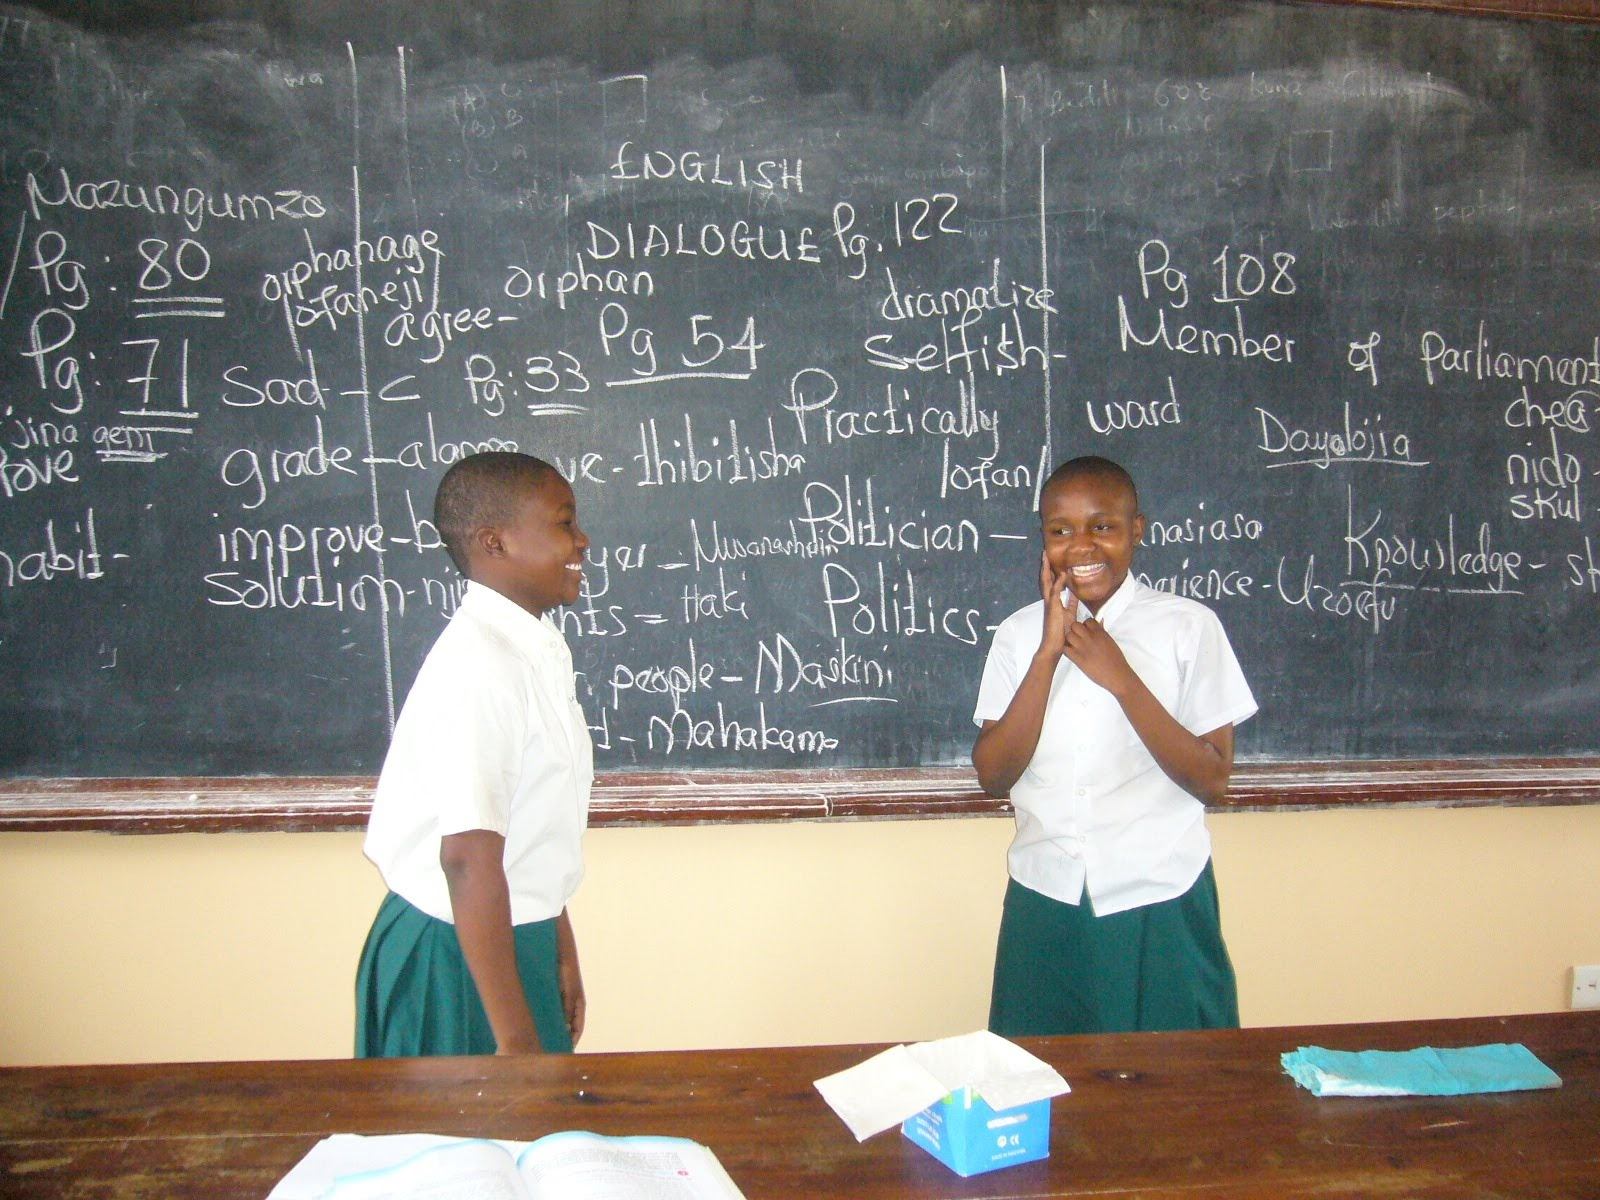 Leila and Sauda doing the English Dialogue in front of their entire English class at SEGA school for girls in Tanzania. Image courtesy of Nurturing Minds.